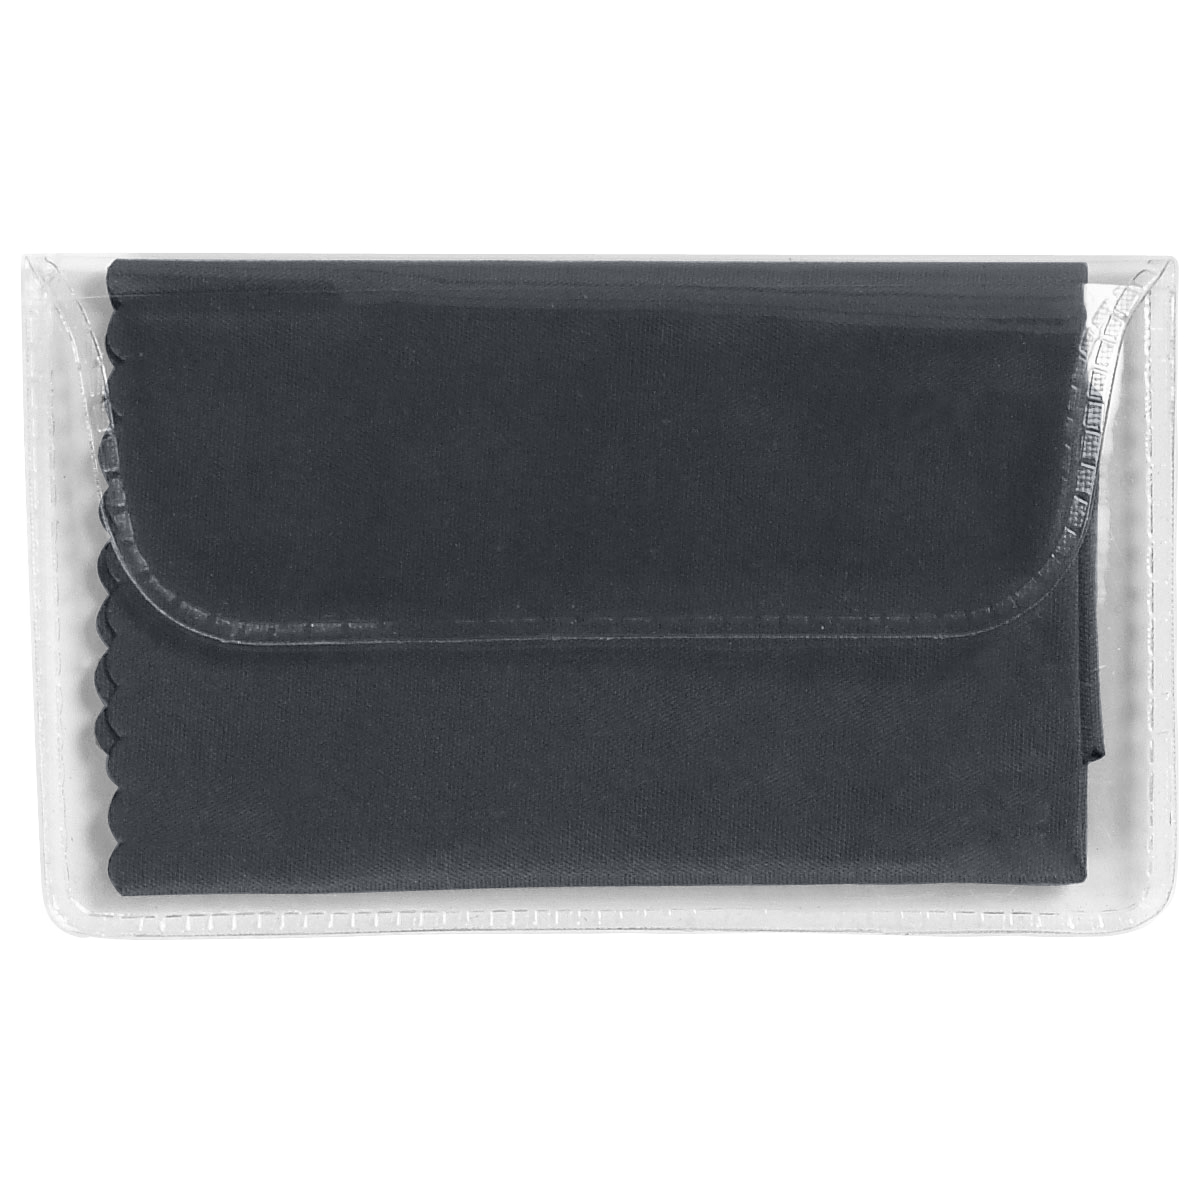 Black Microfiber Cleaning Cloth In Case